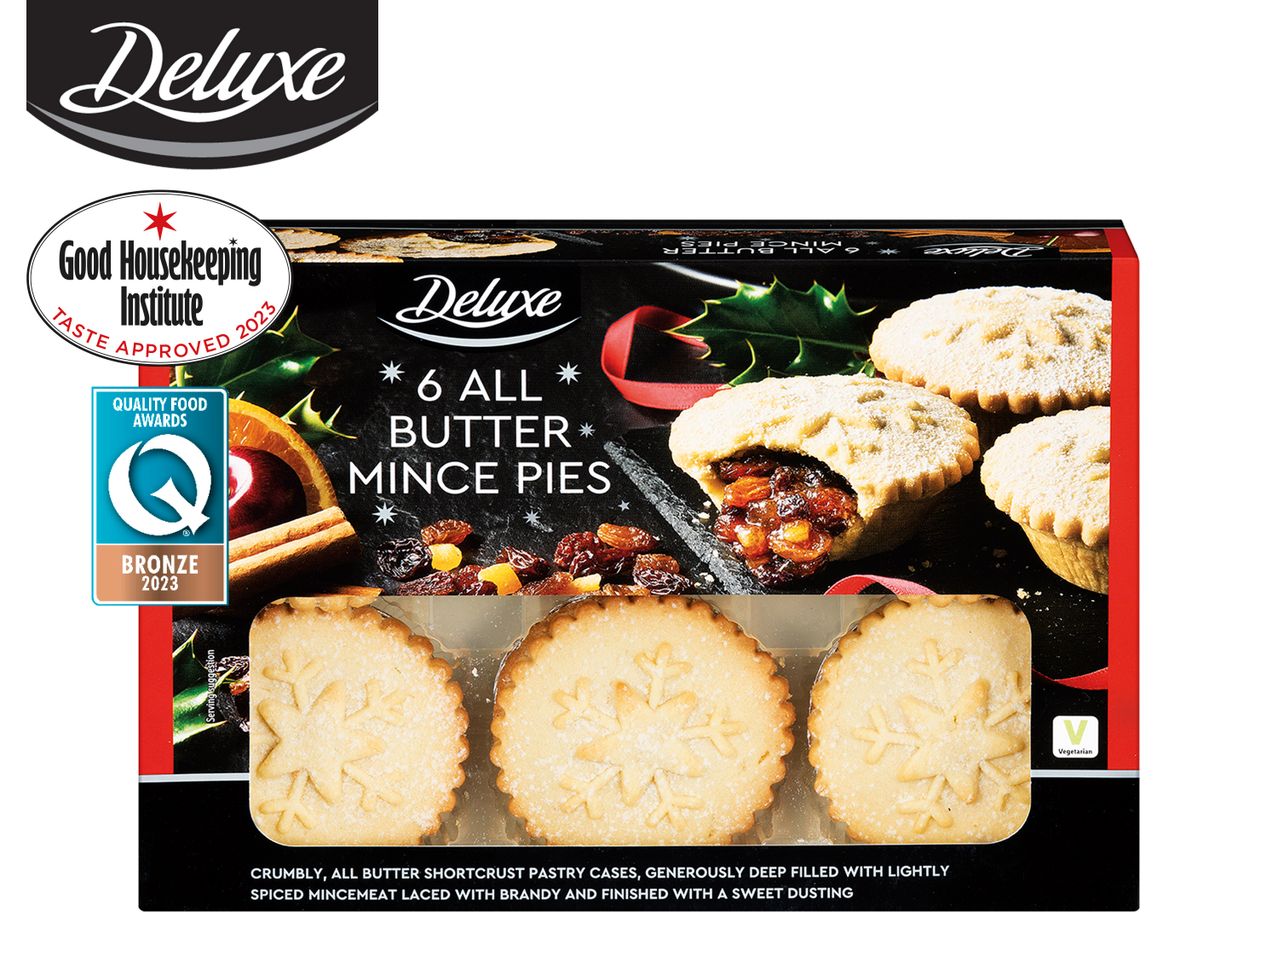 Go to full screen view: Deluxe Luxury Mince Pies - Image 1